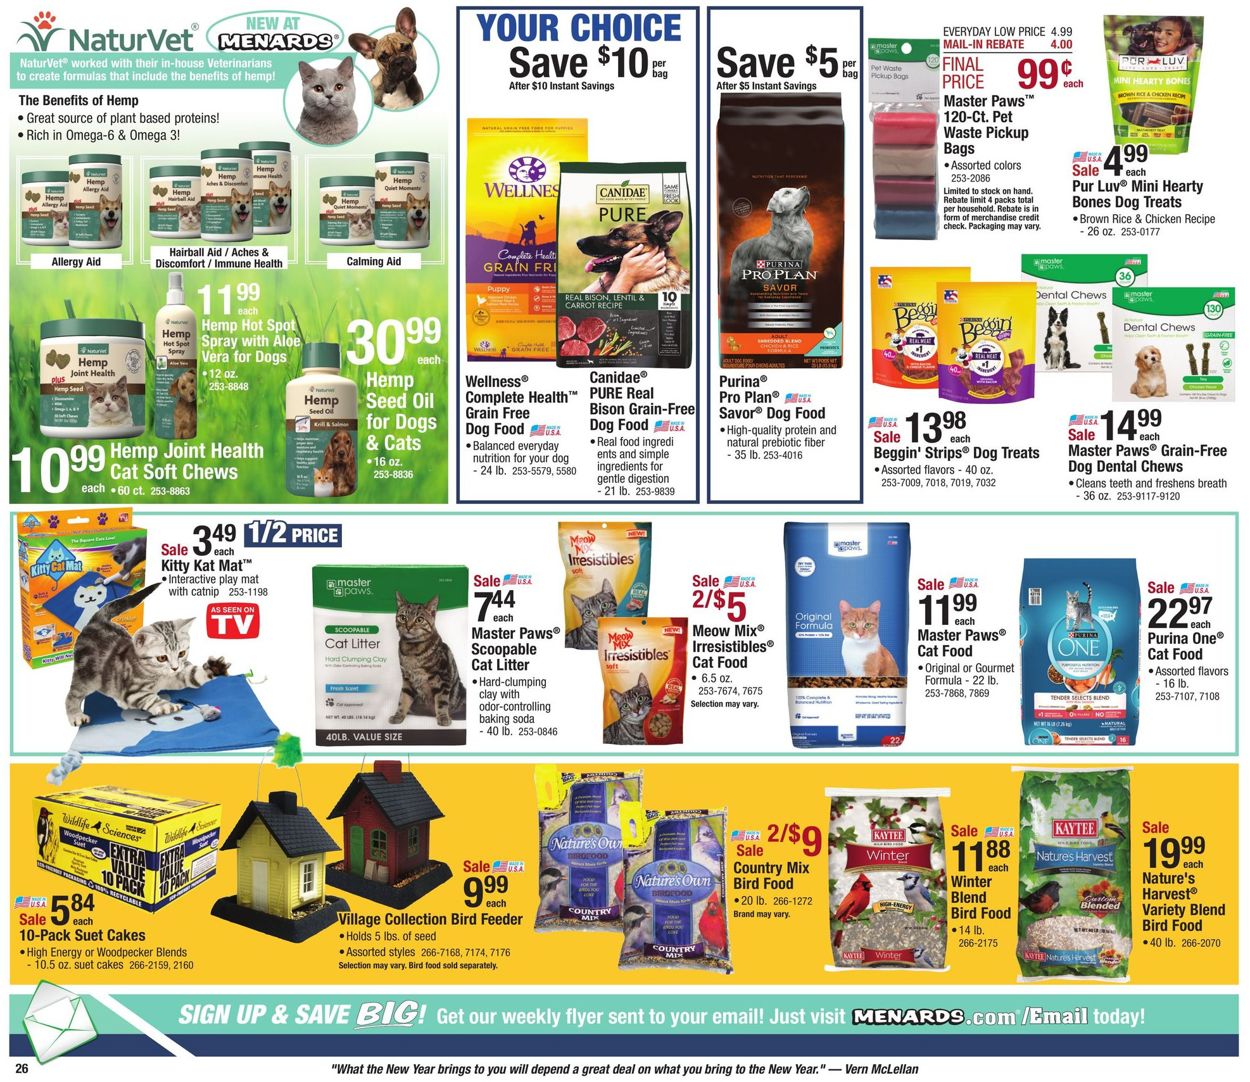 Menards Current weekly ad 12/29 - 01/04/2020 [33] - frequent-ads.com